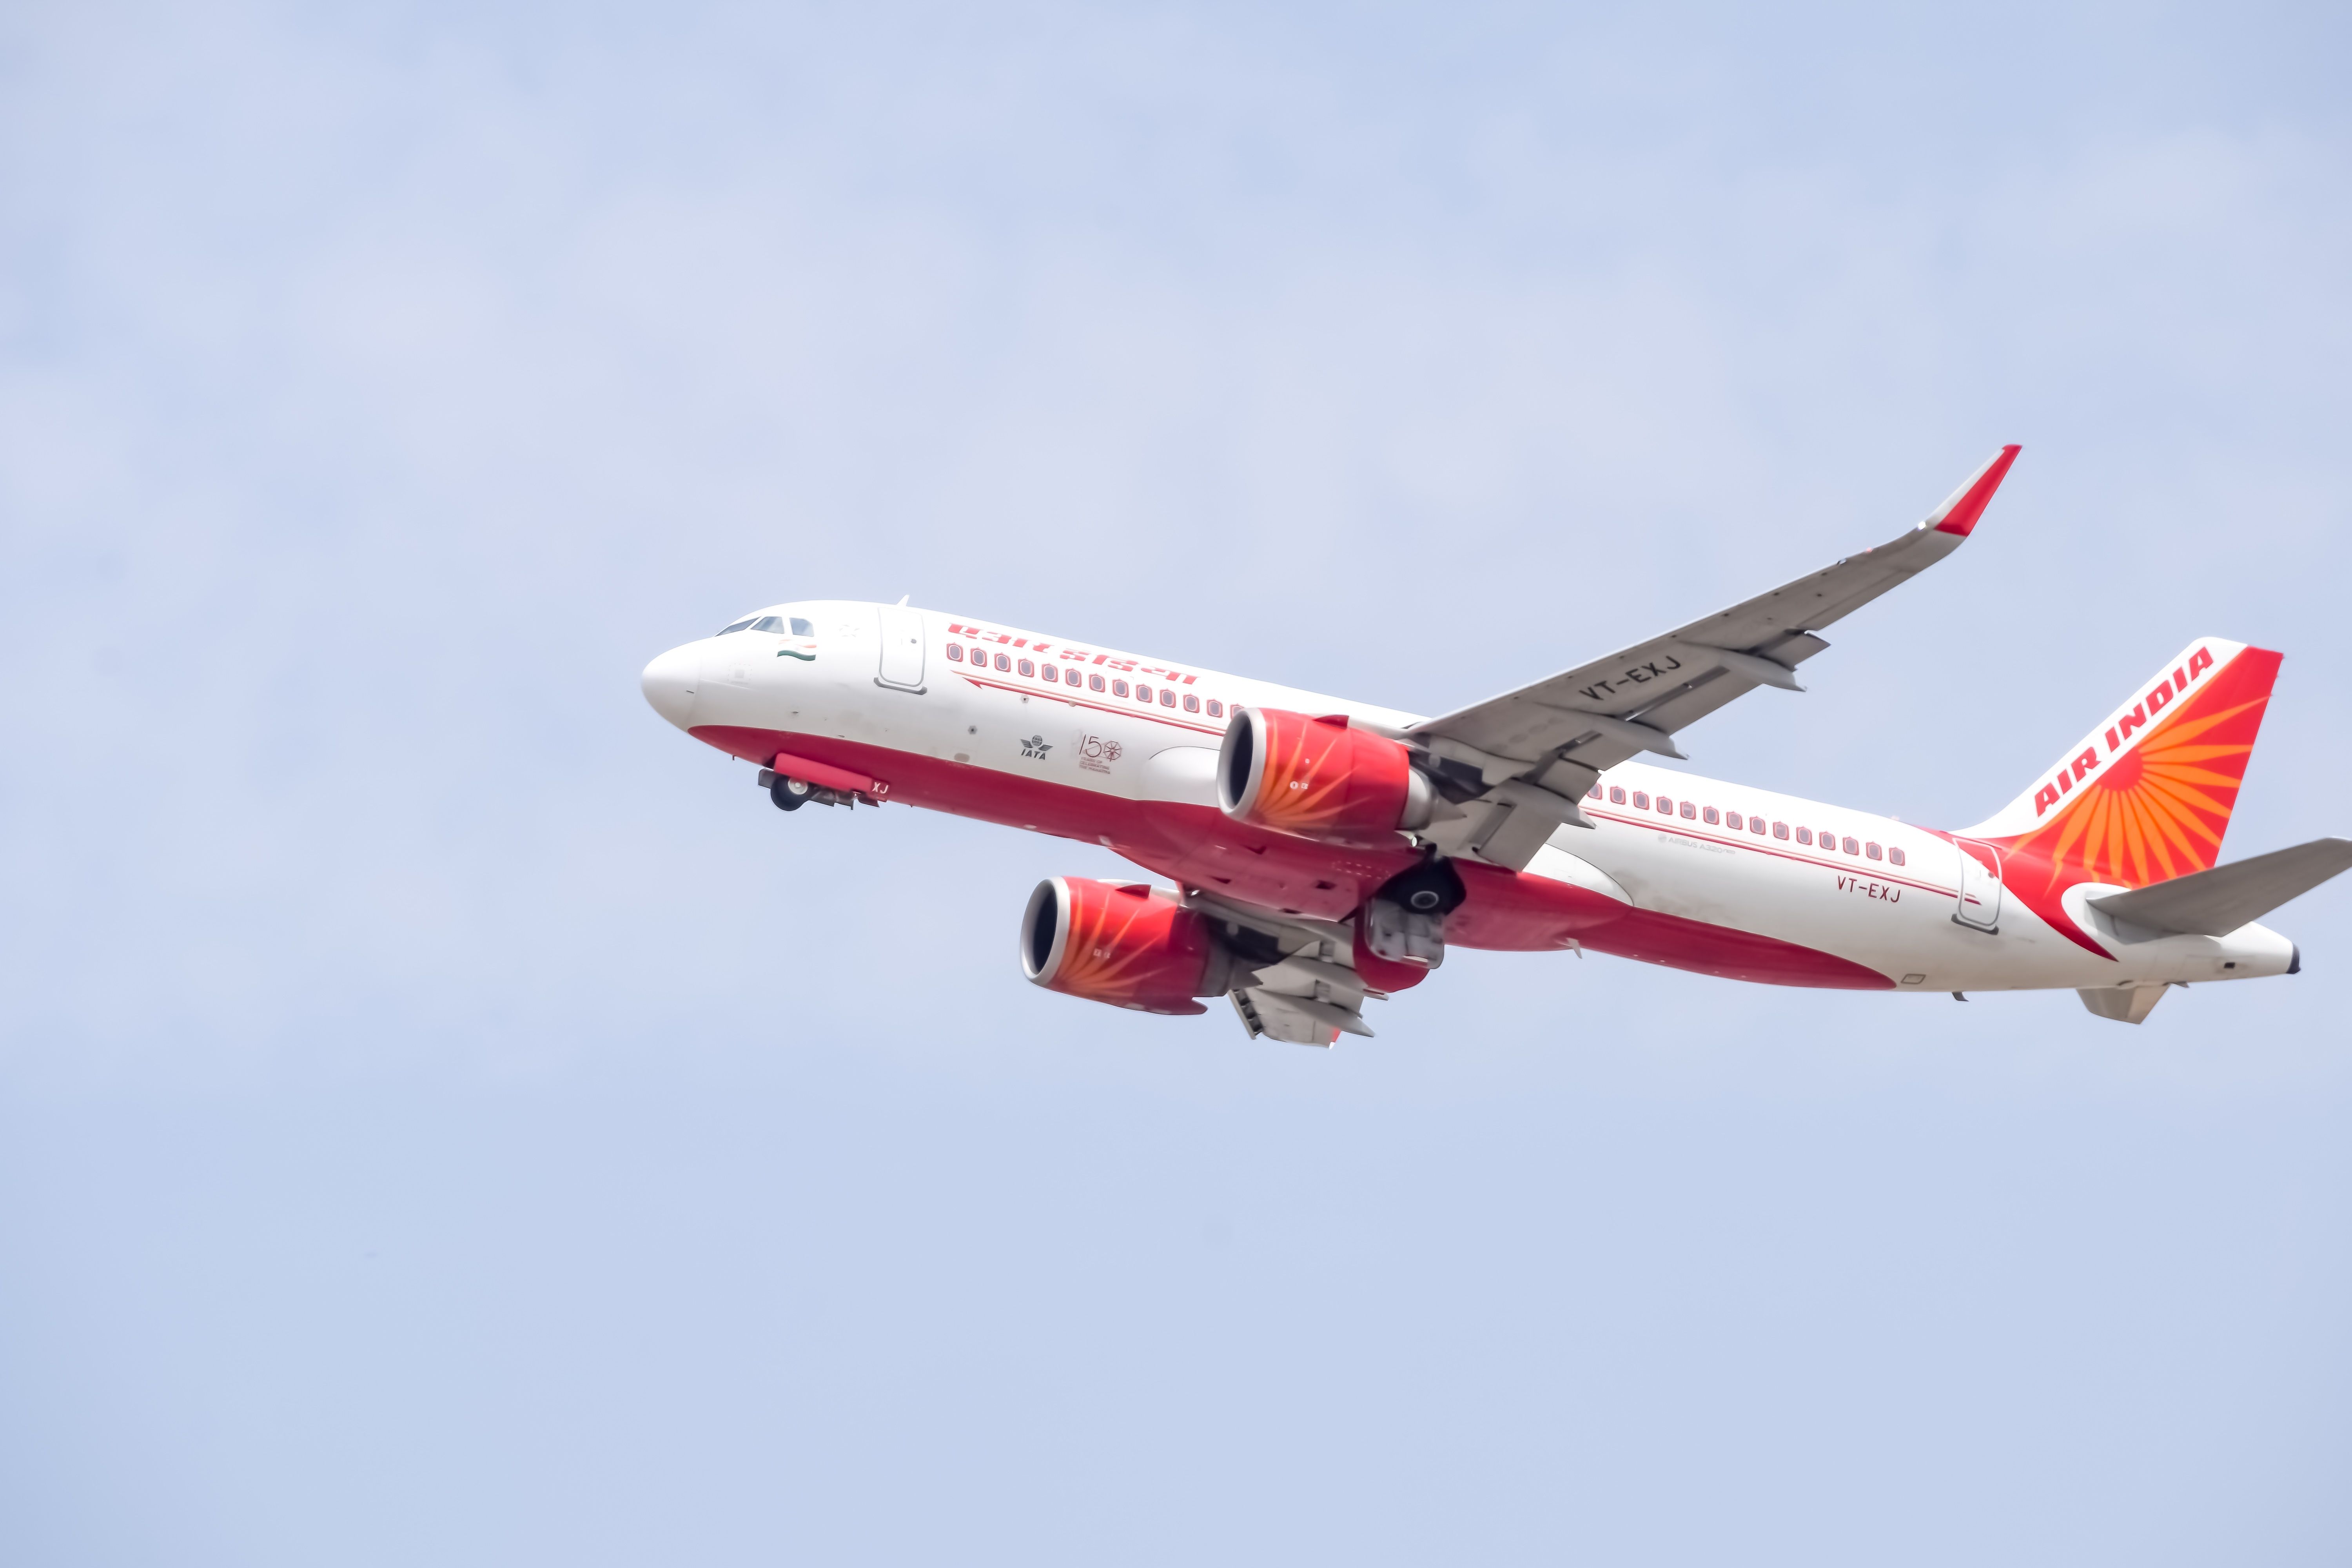 An Air India Airbus A320 takes off from Indra Gandhi International Airport Delhi.